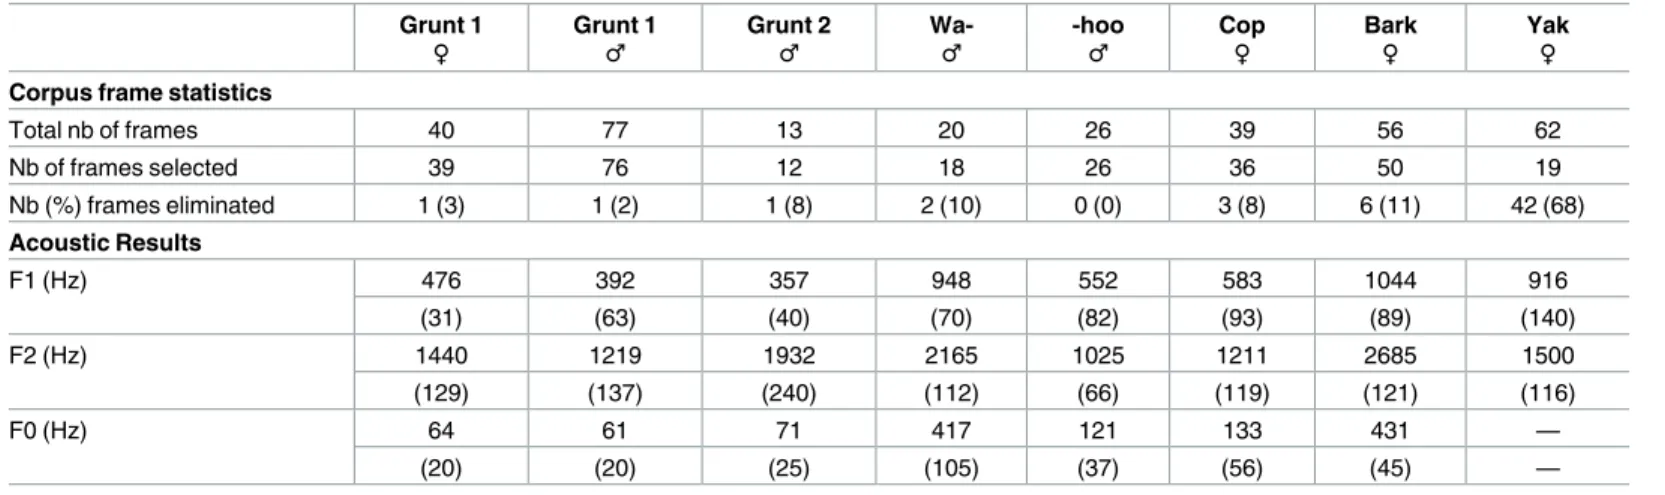 Table 2. Corpus frame statistics and acoustic results.